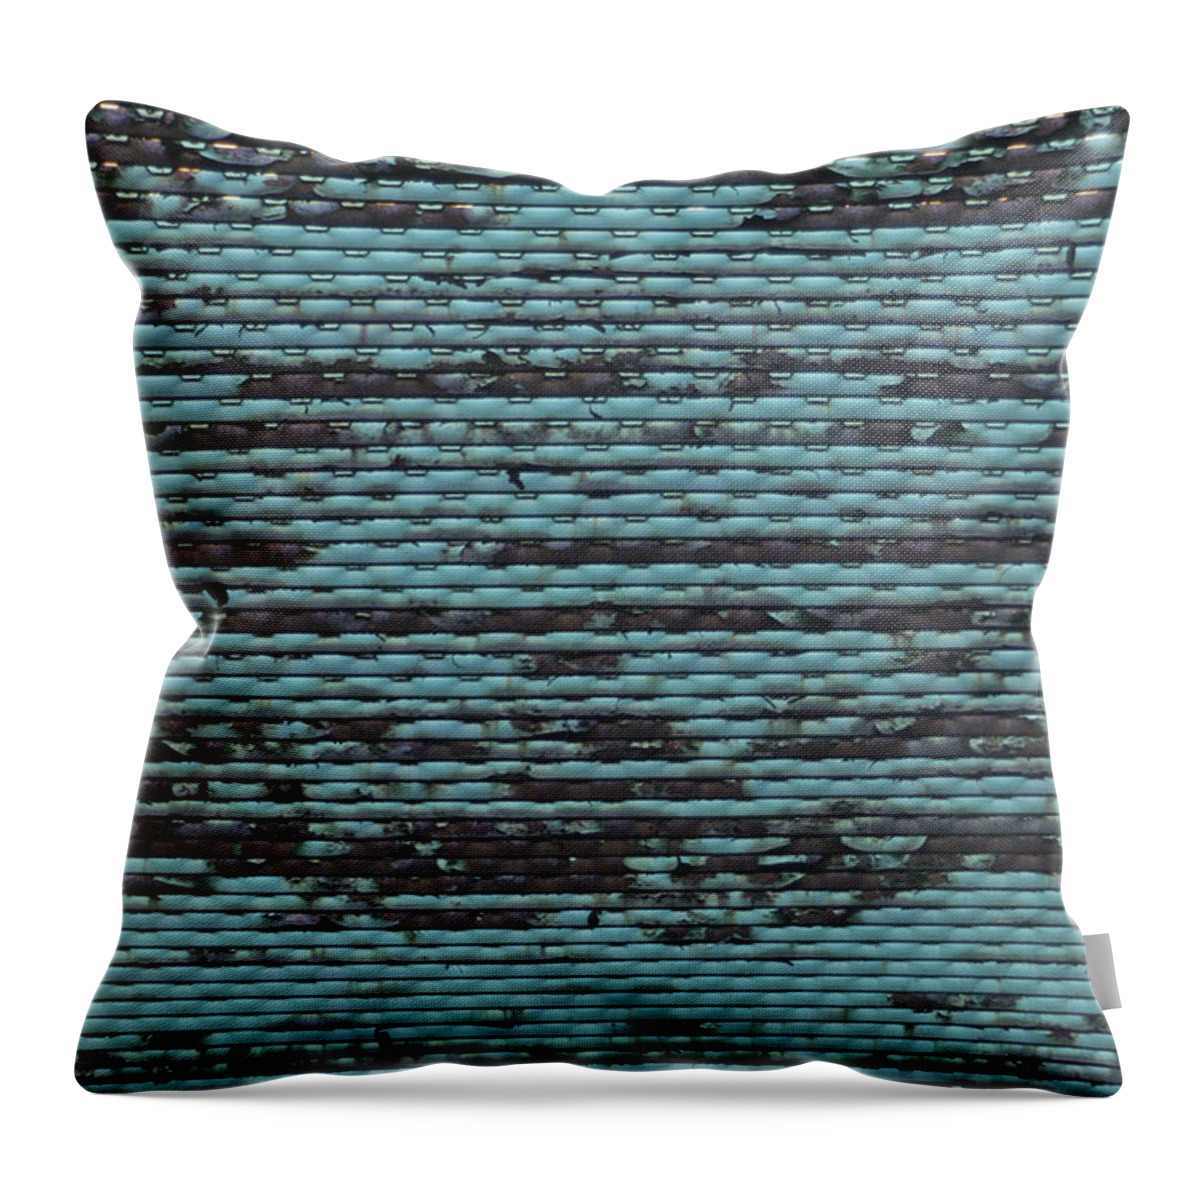 Grid Throw Pillow featuring the photograph City Metal Grid by Henri Irizarri